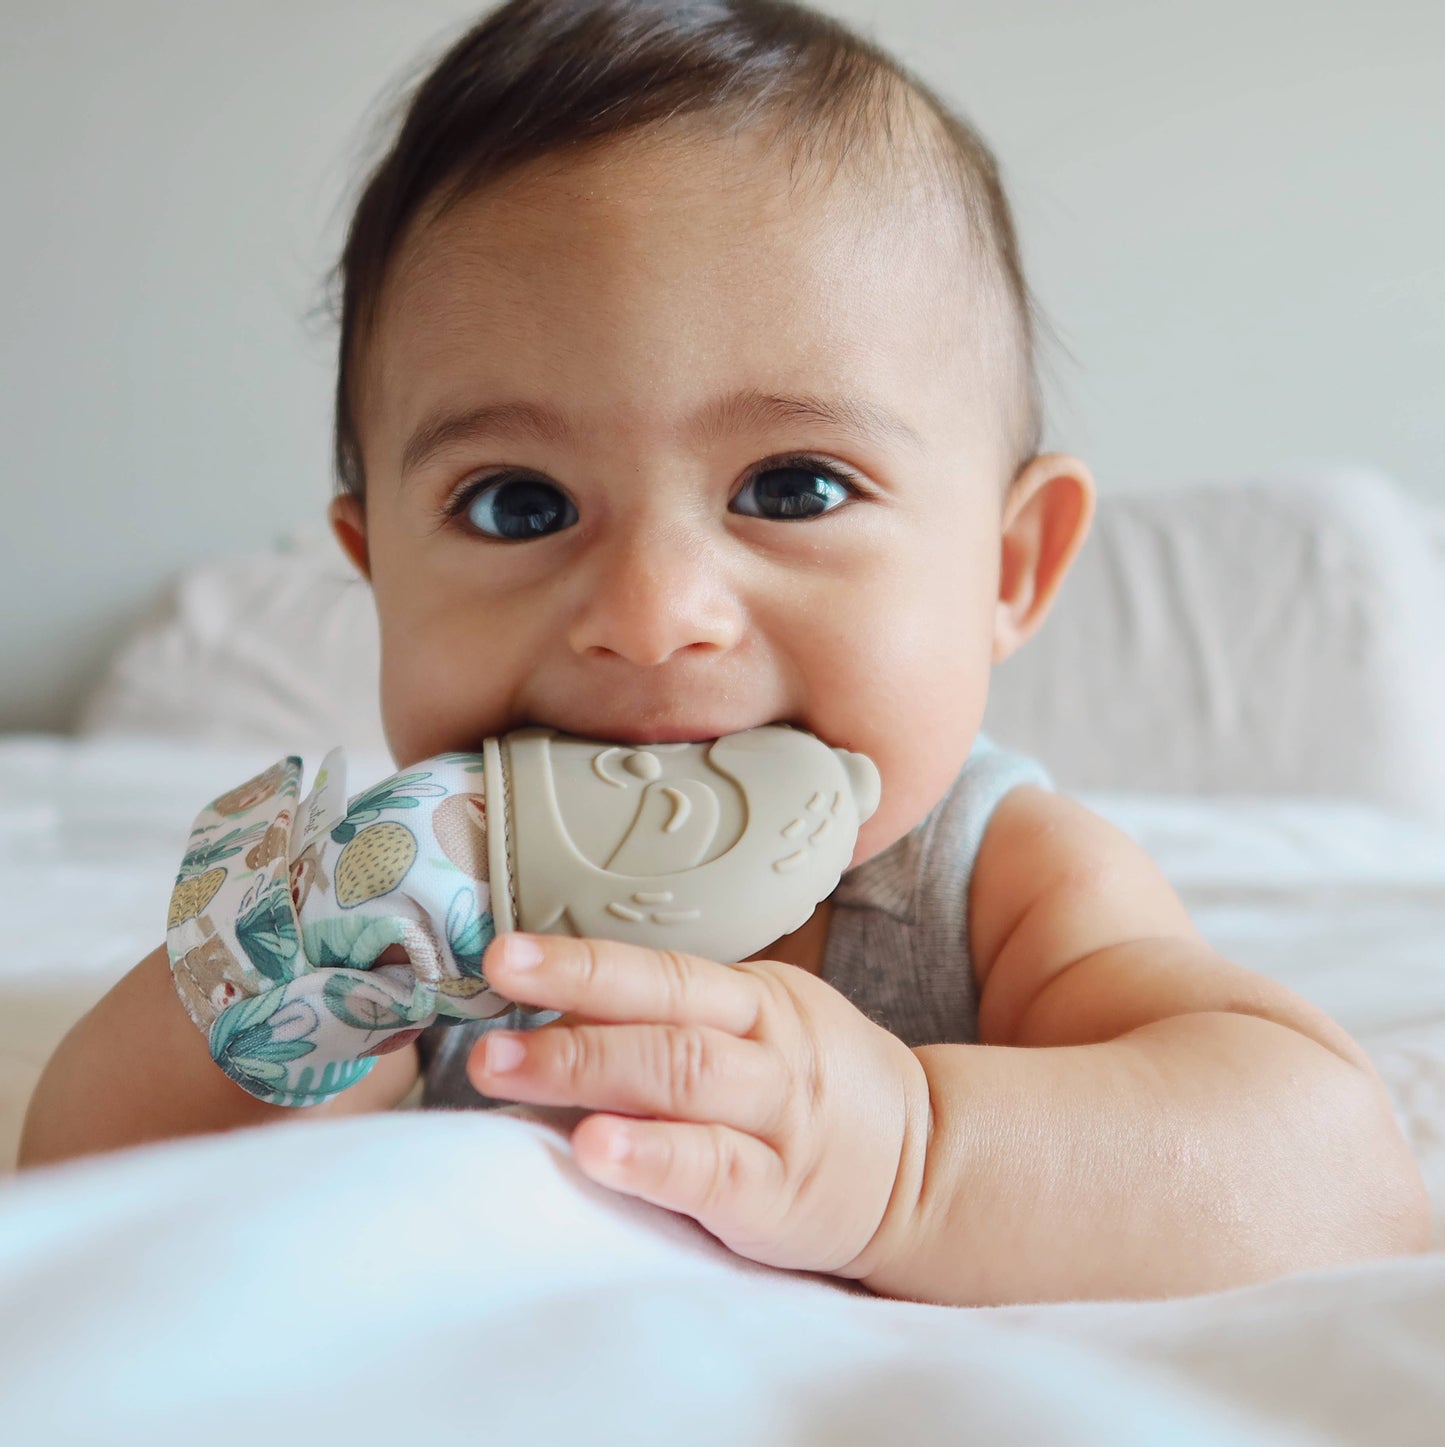 Itzy Ritzy - Itzy Mitt™ Silicone Teething Mitts